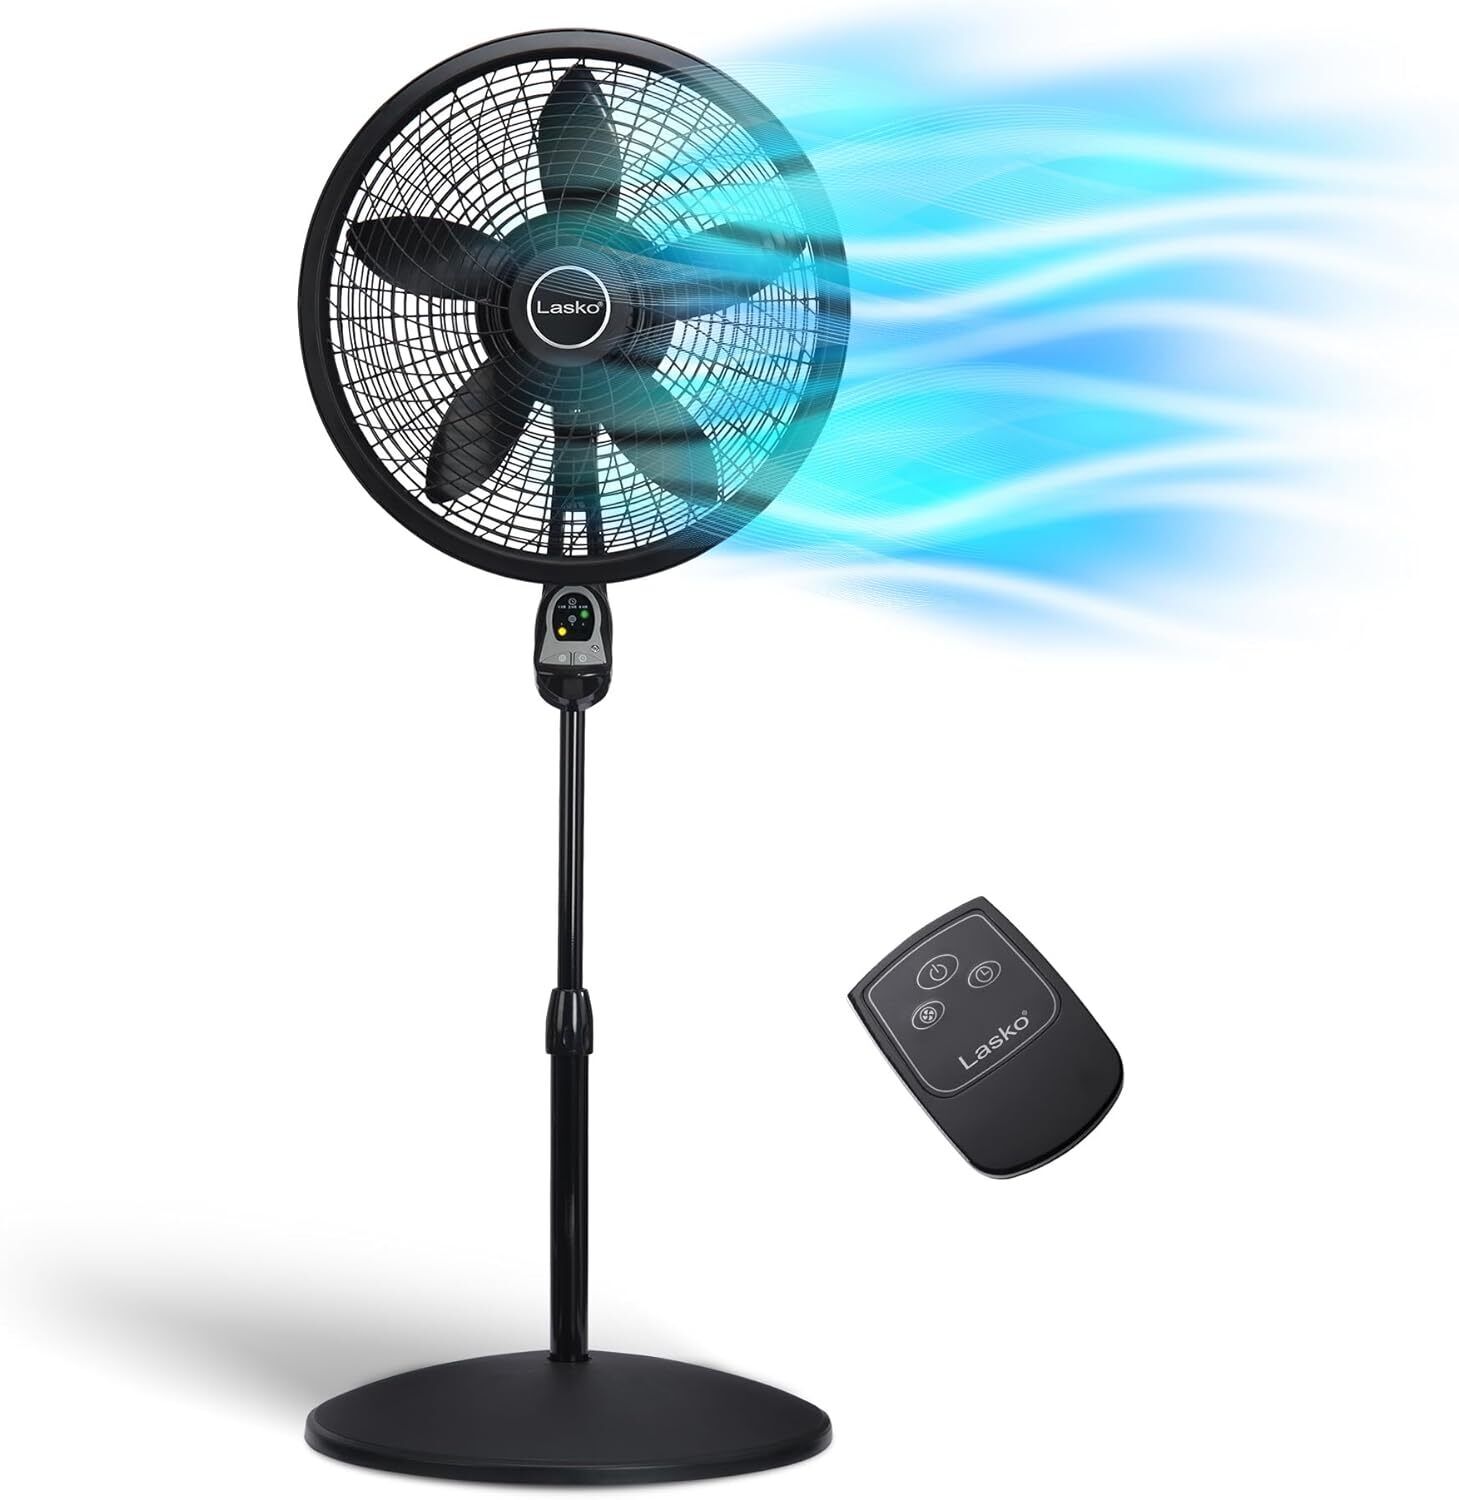 Oscillating Cyclone Pedestal Fan, Adjustable Height, Timer, Remote Control